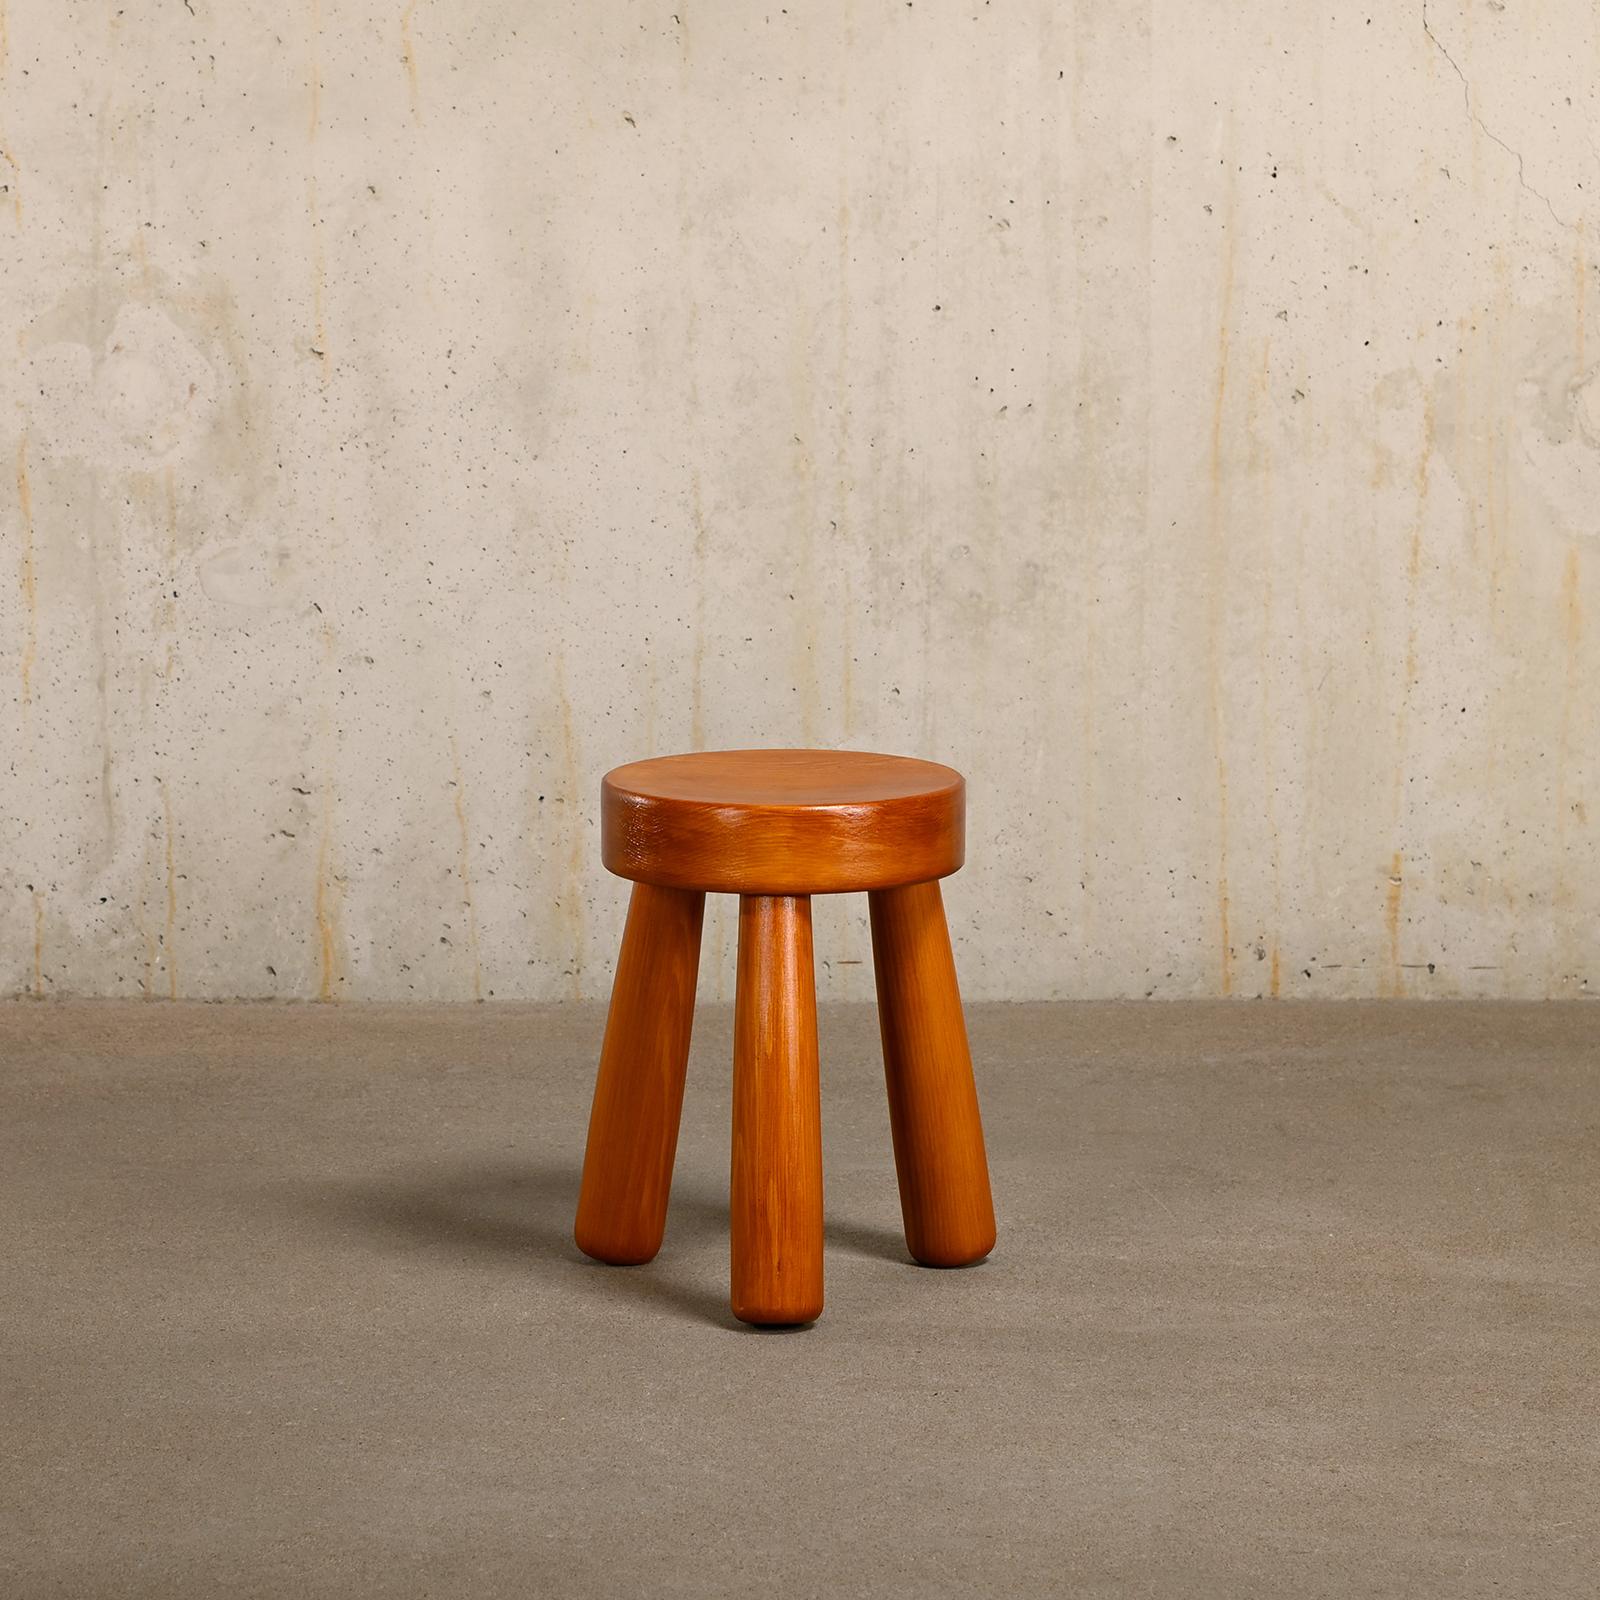 Beautiful Tripod Stool designed in the manner of Ingvar Hildingsson, Sweden. Solid pine wood and finished with a clear lacquer. The stool is in very good condition and stamped with Gröning Design - Bergsjö Sweden.